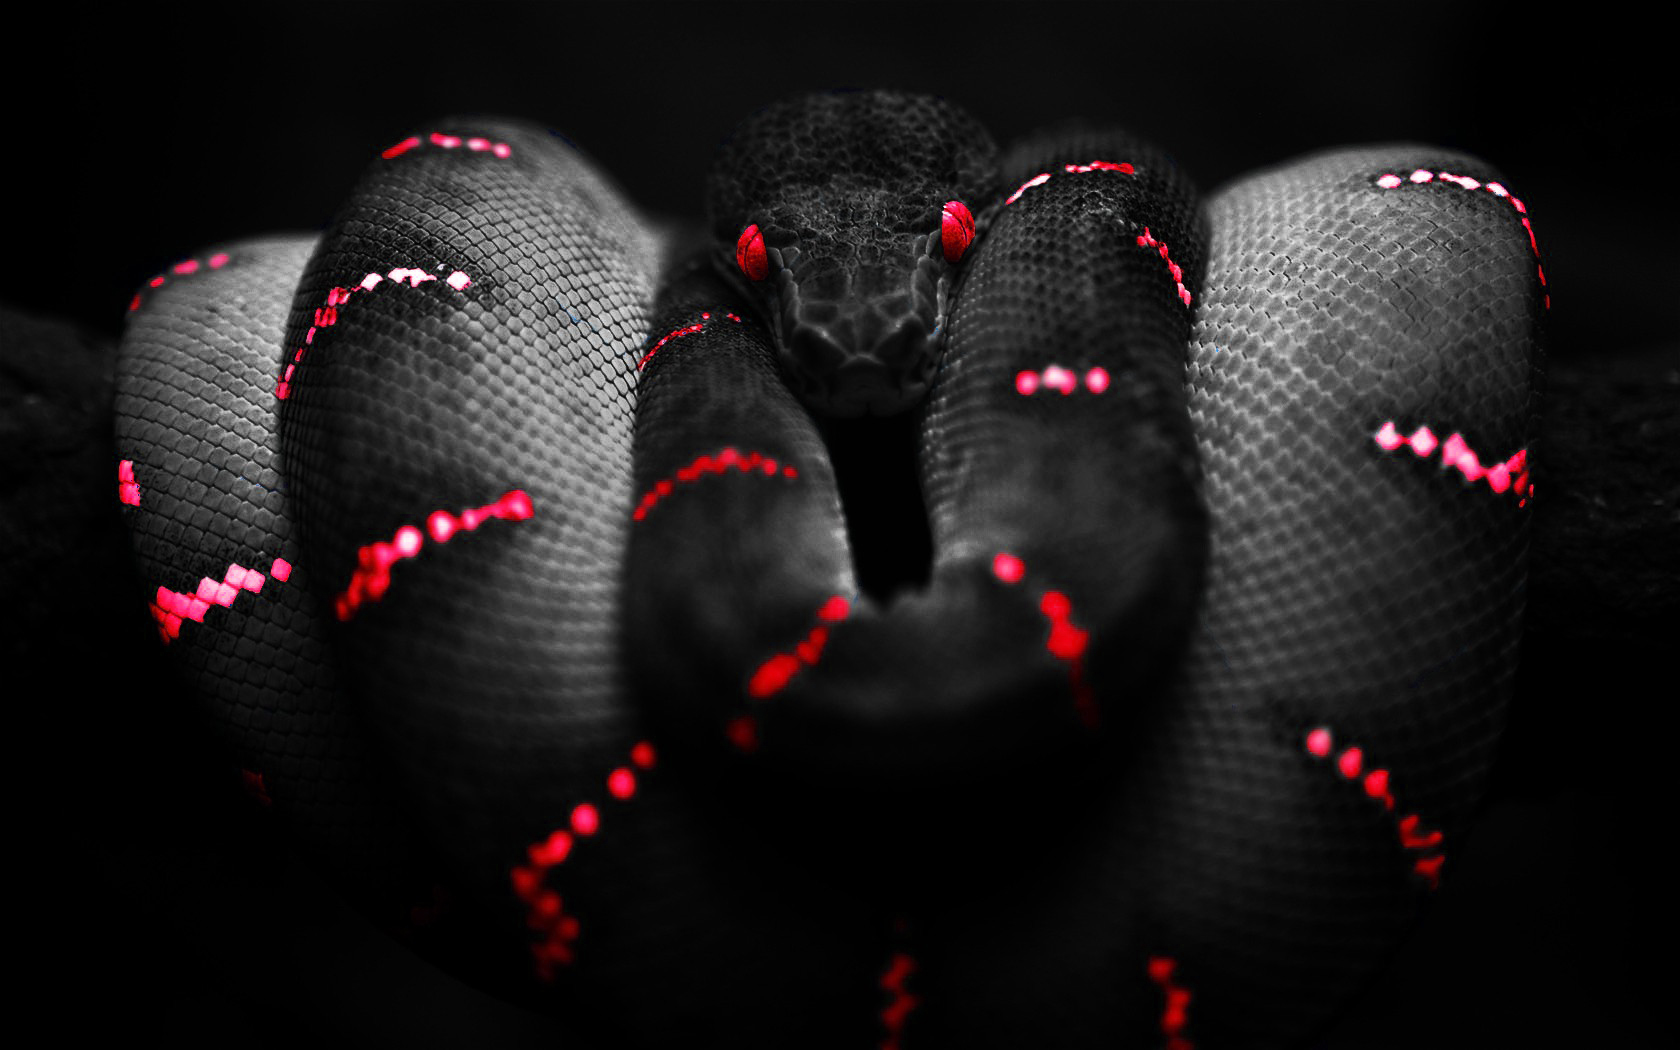 General 1680x1050 snake selective coloring Boa constrictor red red eyes reptiles animals digital art